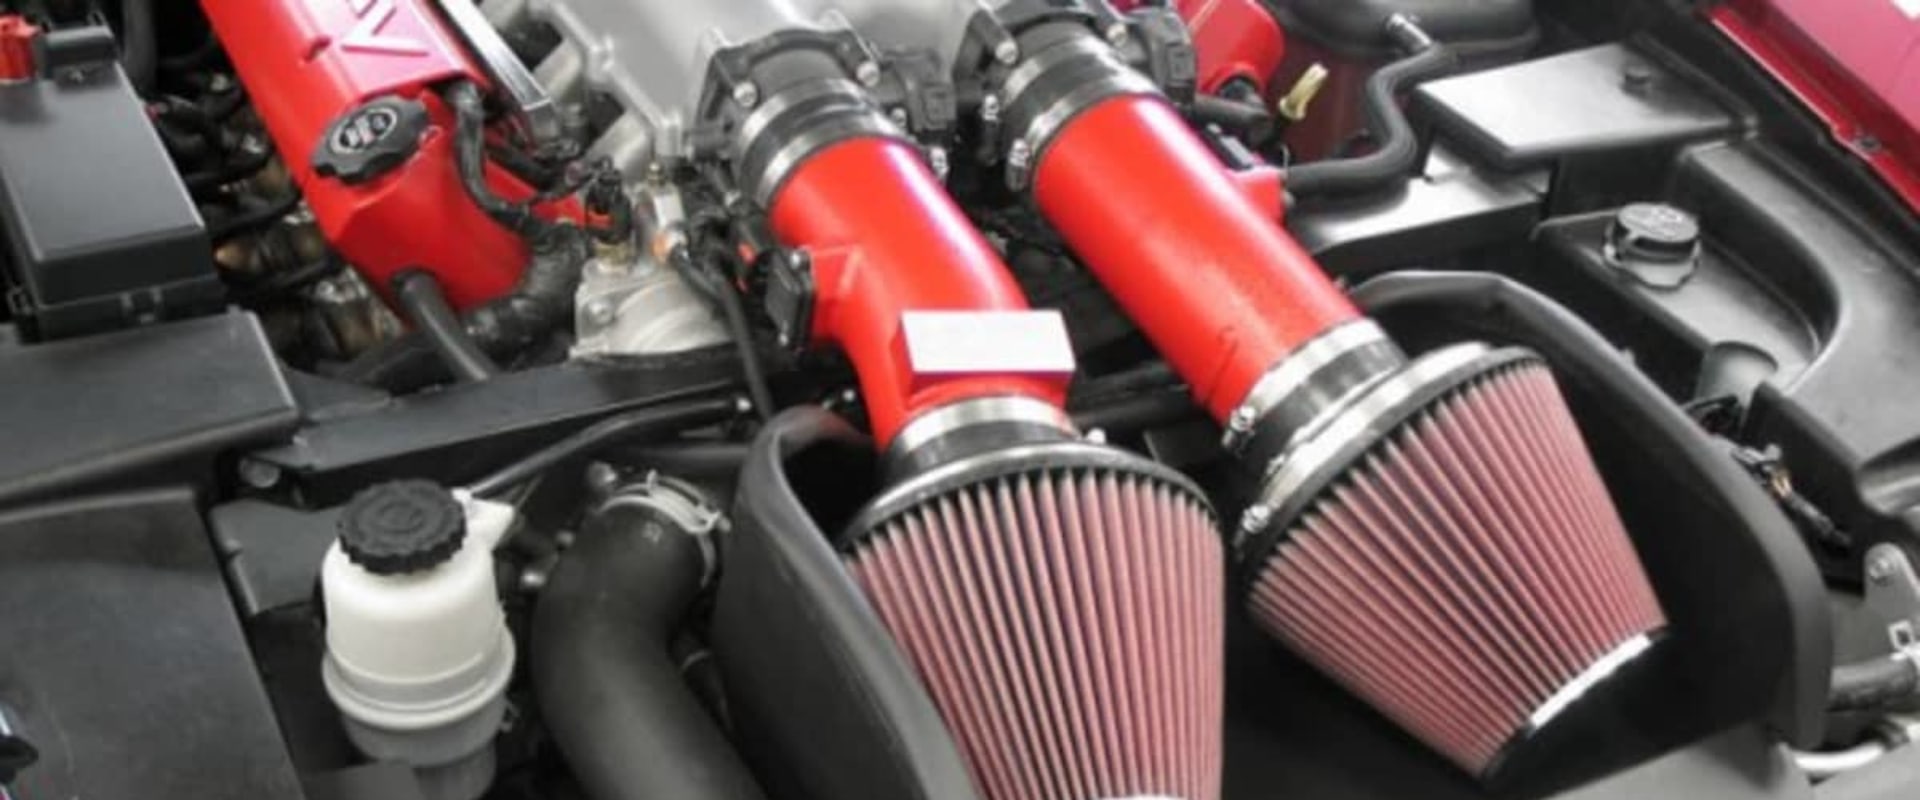 Does a Smaller Air Filter Impact Performance? - An Expert's Perspective